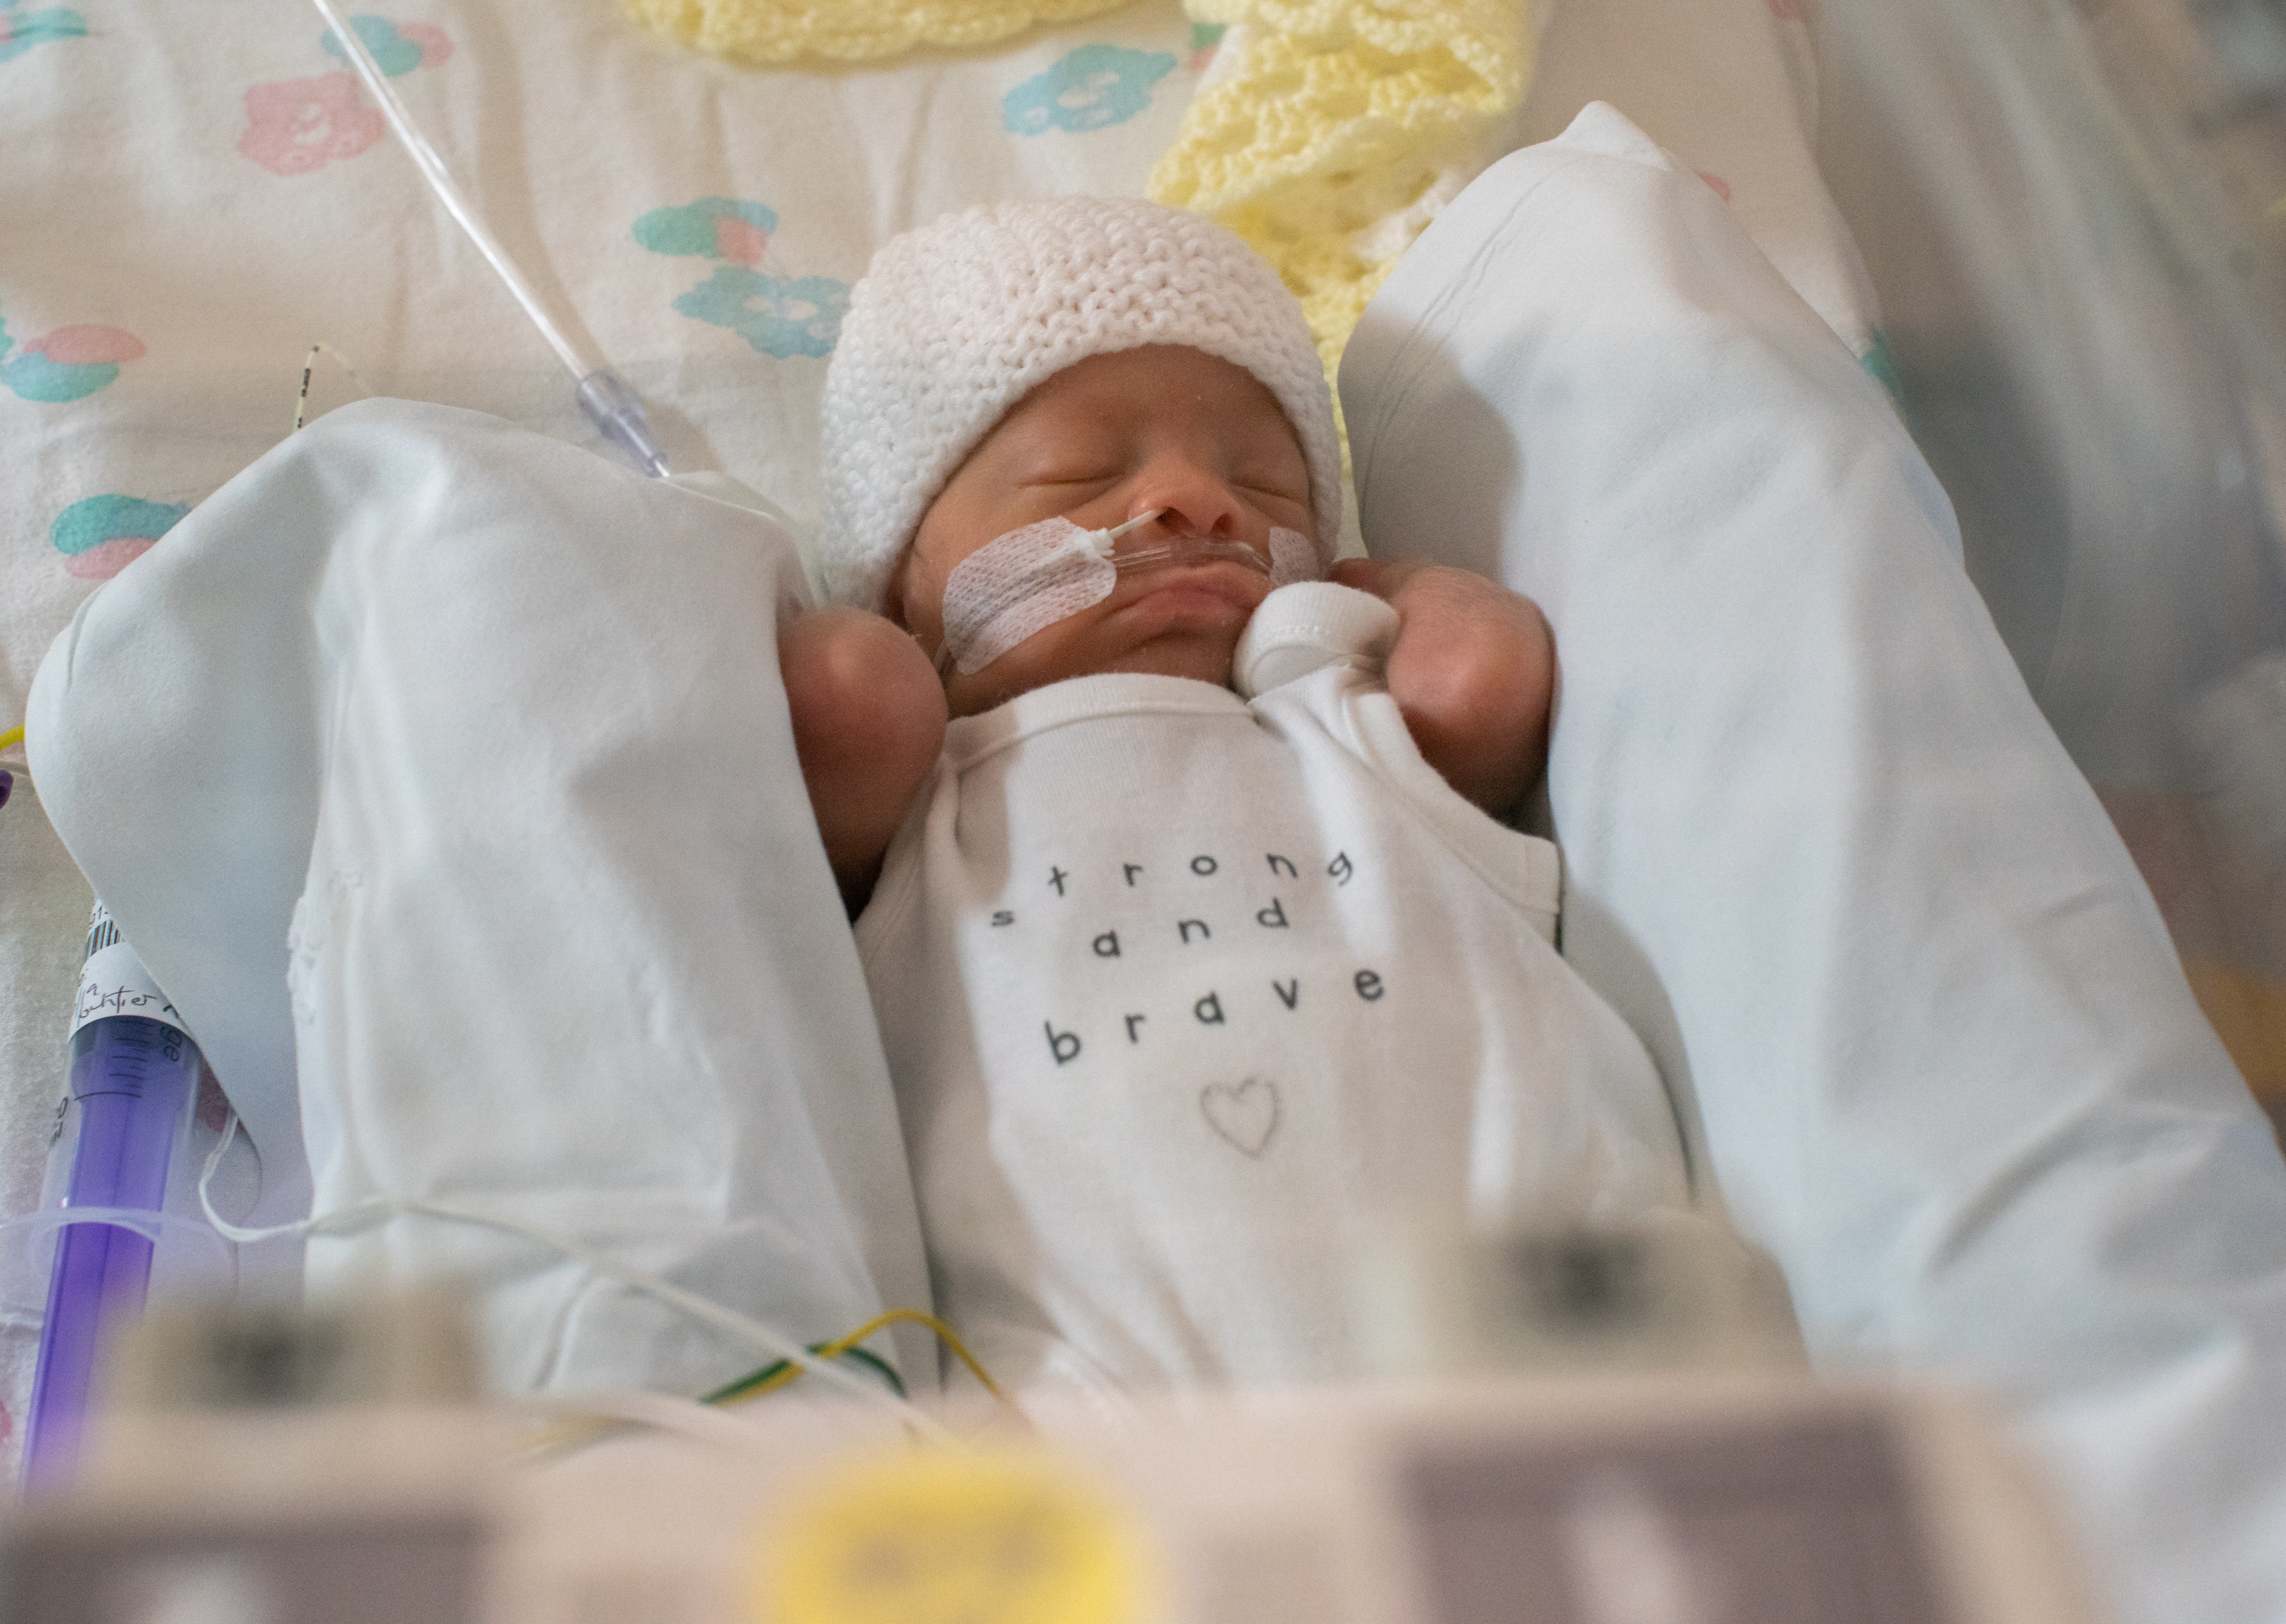 Baby Jaxon lies in his incubator in a white vest which reads Strong and Brave